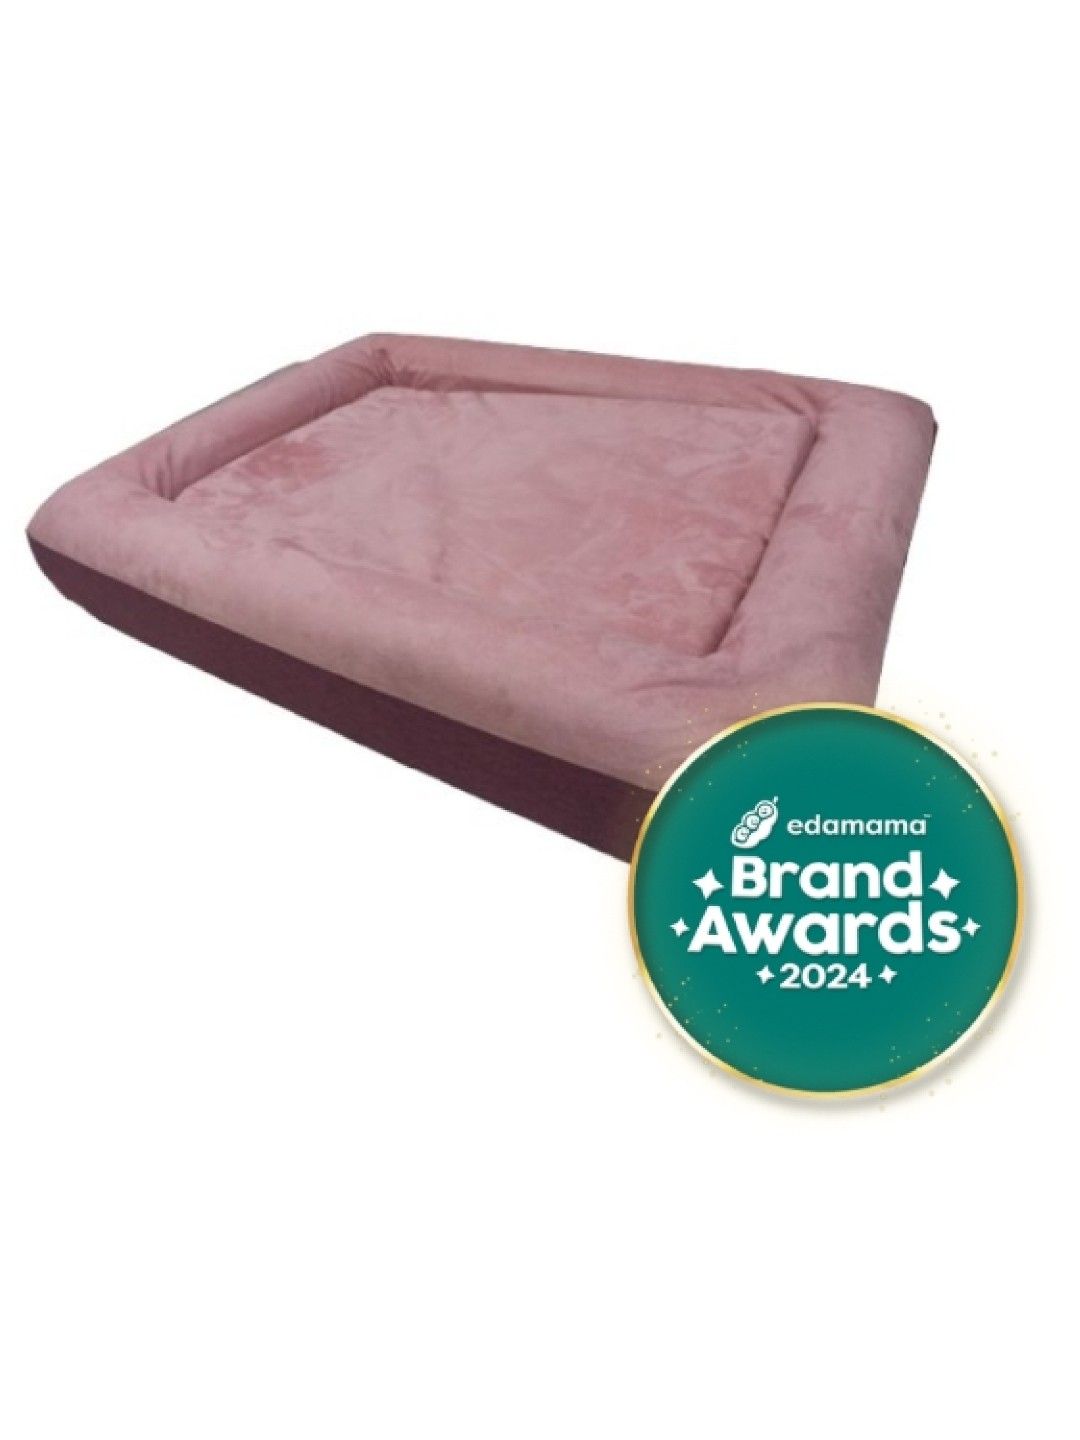 Petto Beddo Pet Bed (Pink- Image 1)